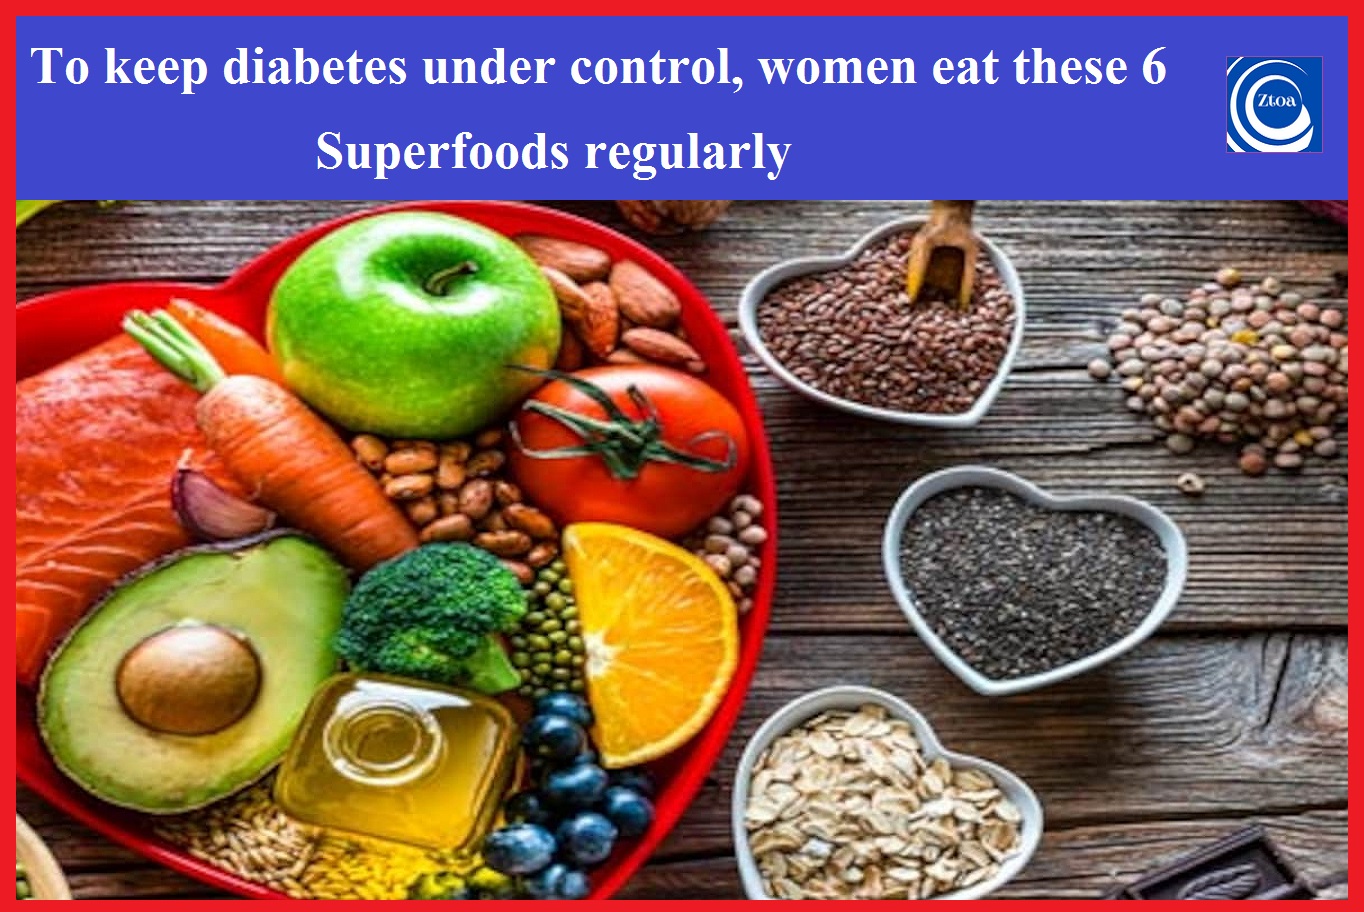 To keep diabetes under control, women eat these 6 superfoods regularly